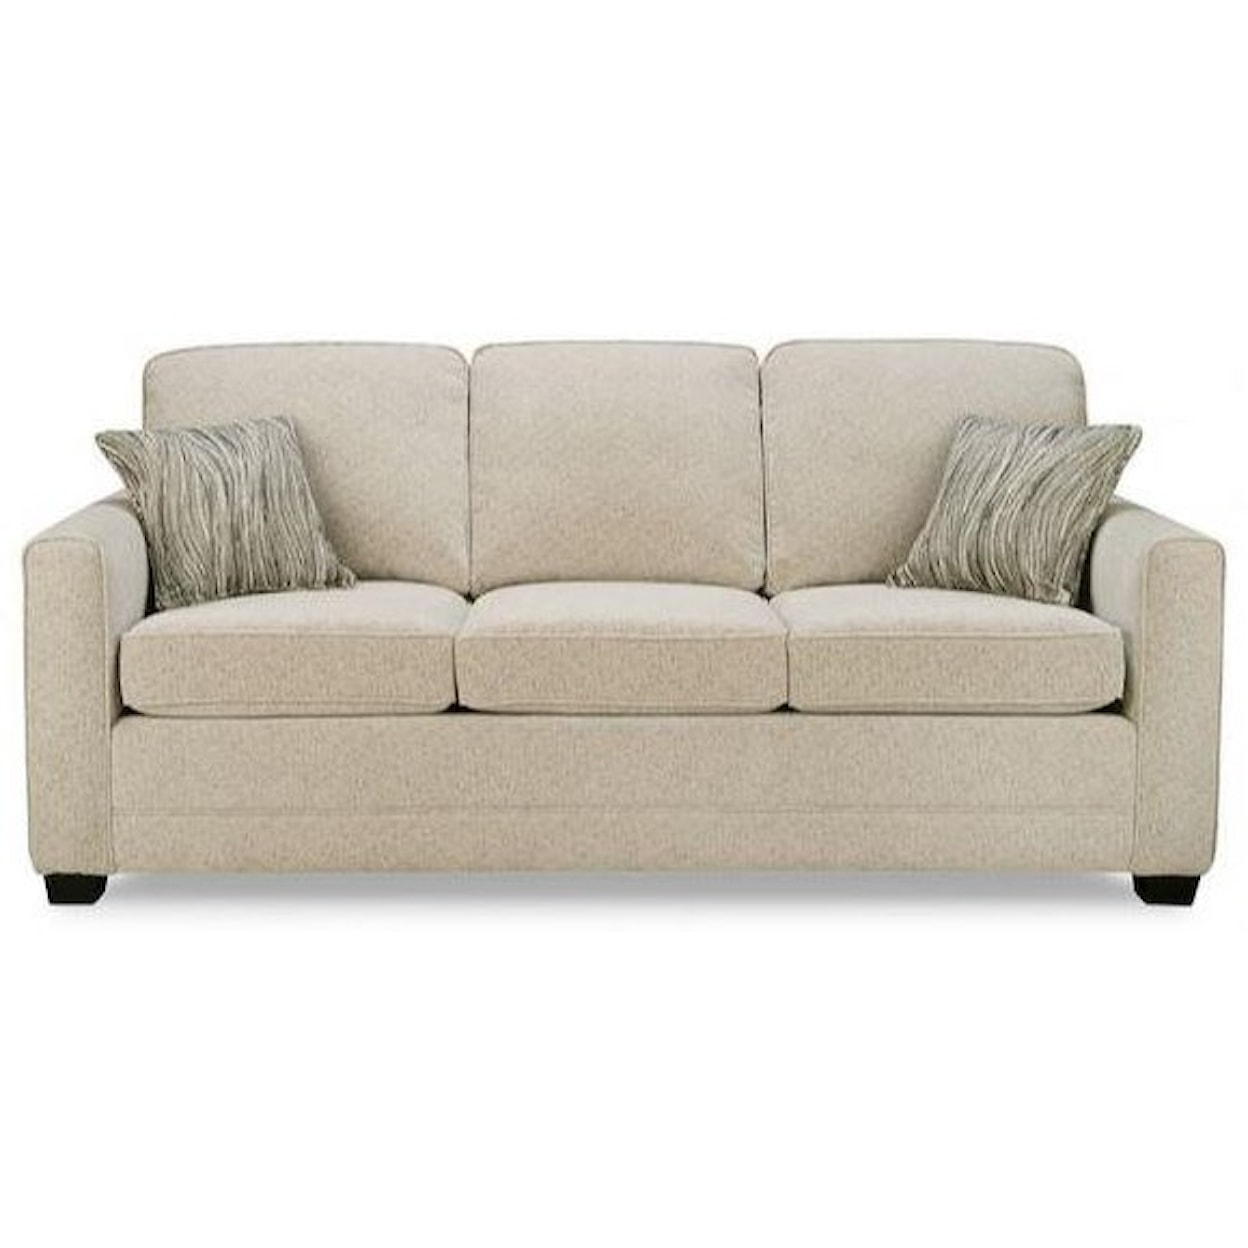 Simmons Upholstery Canada Trinity Queen Sofa Bed